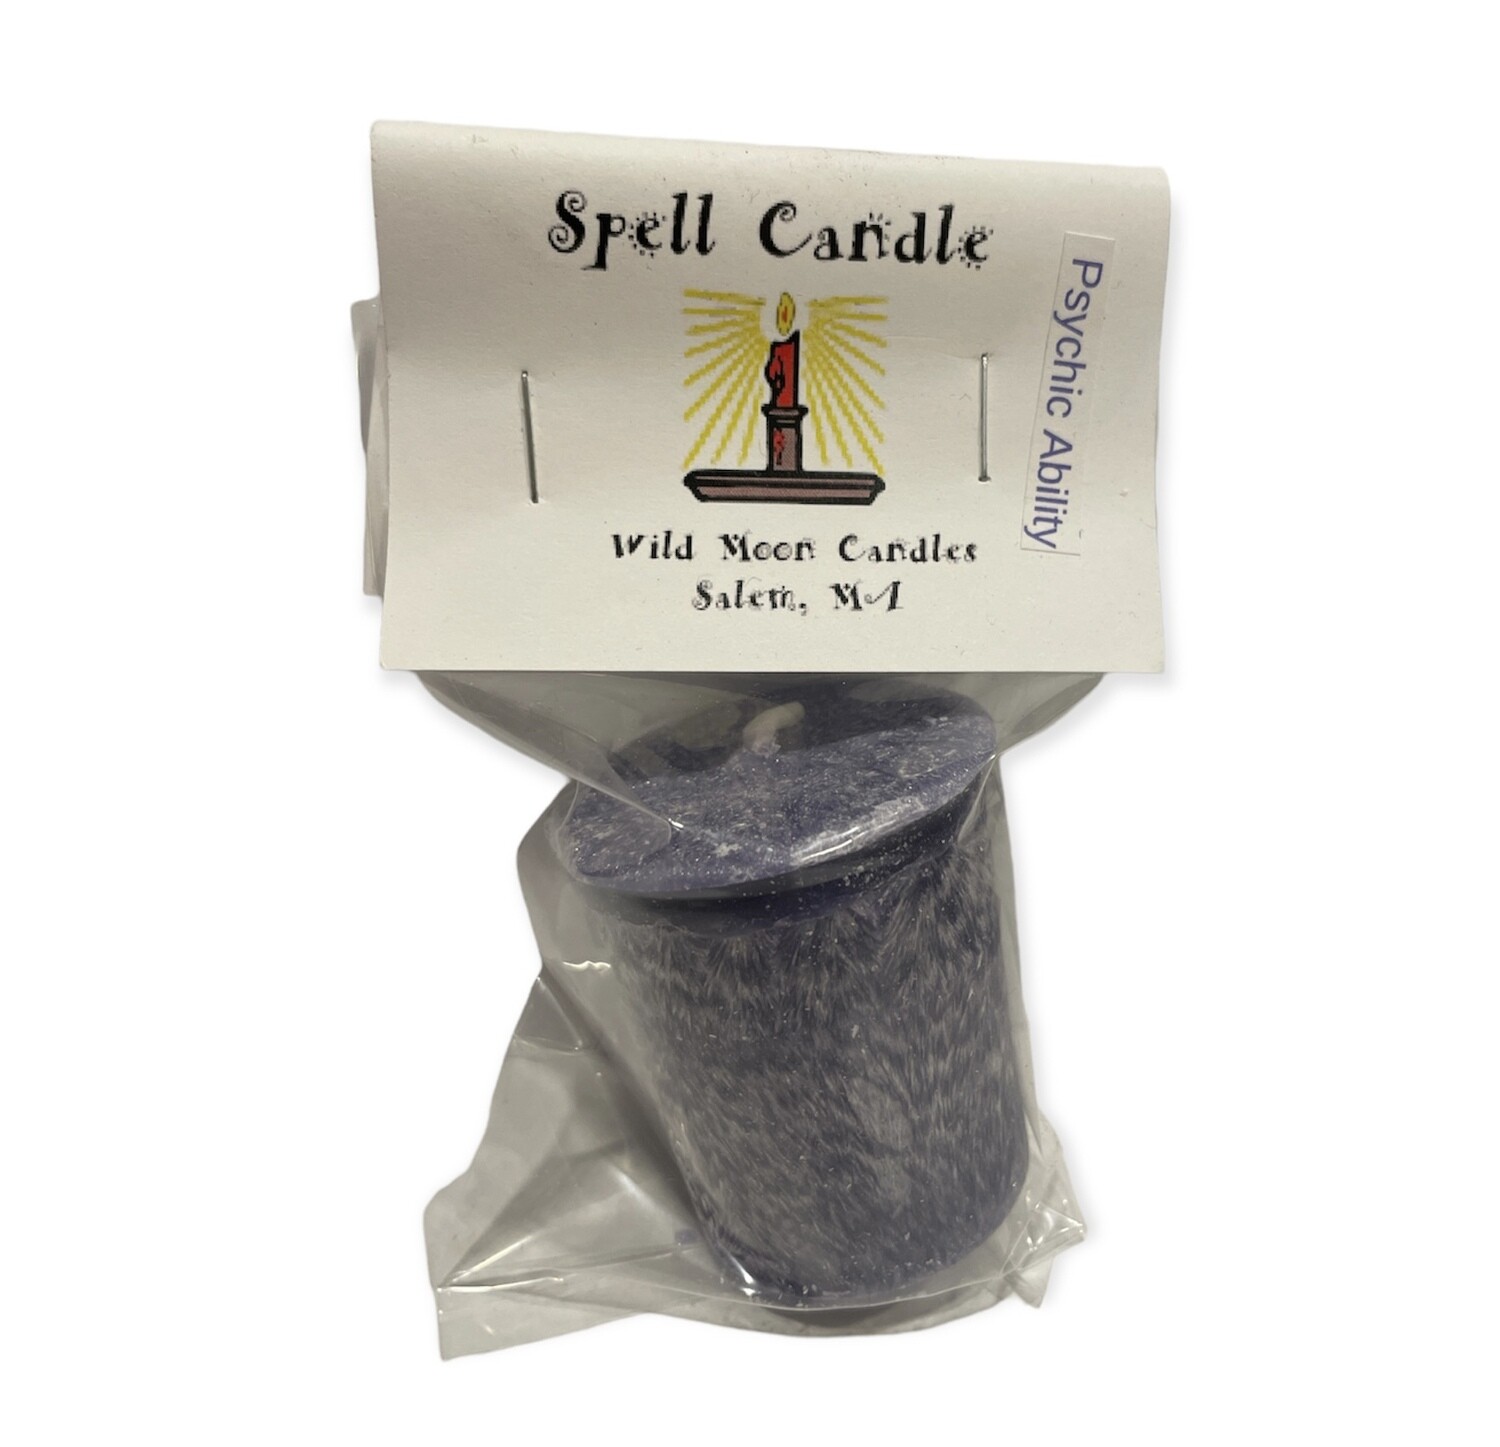 Psychic Ability Votive Candle Spell